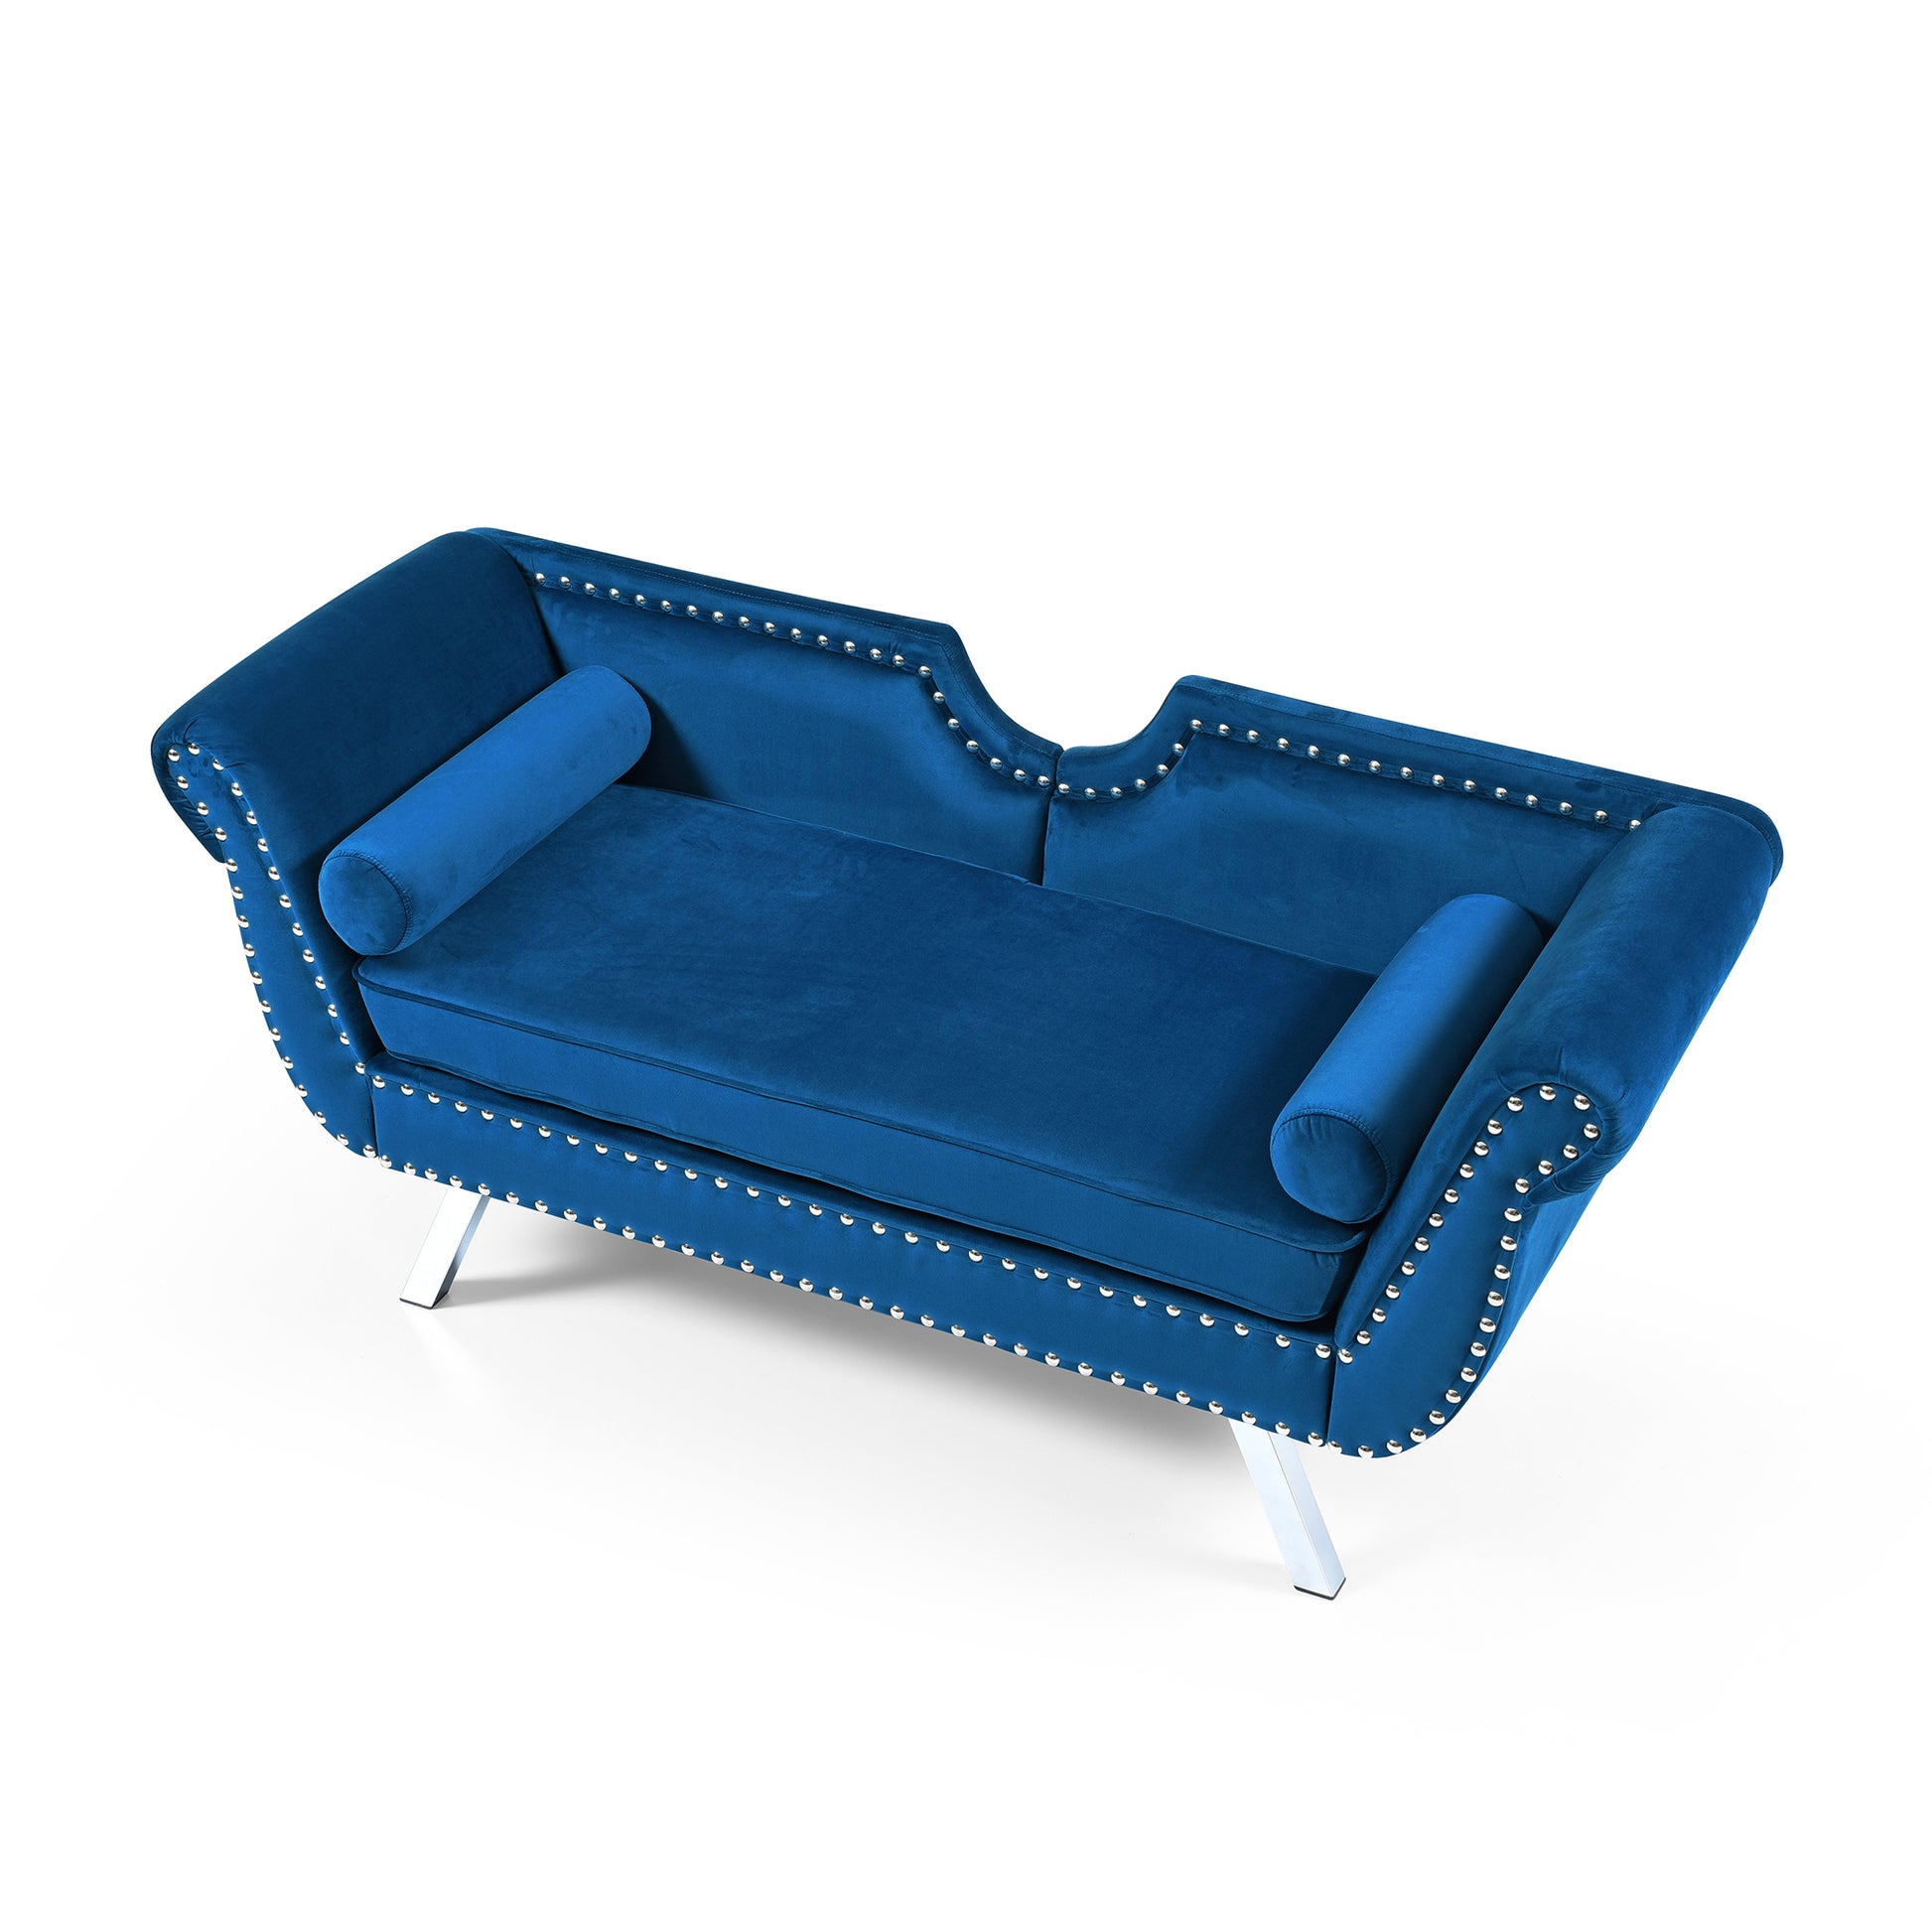 Modern Accent Velvet Upholstered Loveseat Settee Nailhead Trimming Curved Backrest Rolled Arms Couch with Removable Cushion Silver Metal Legs Living Room Set,Blue - Enova Luxe Home Store